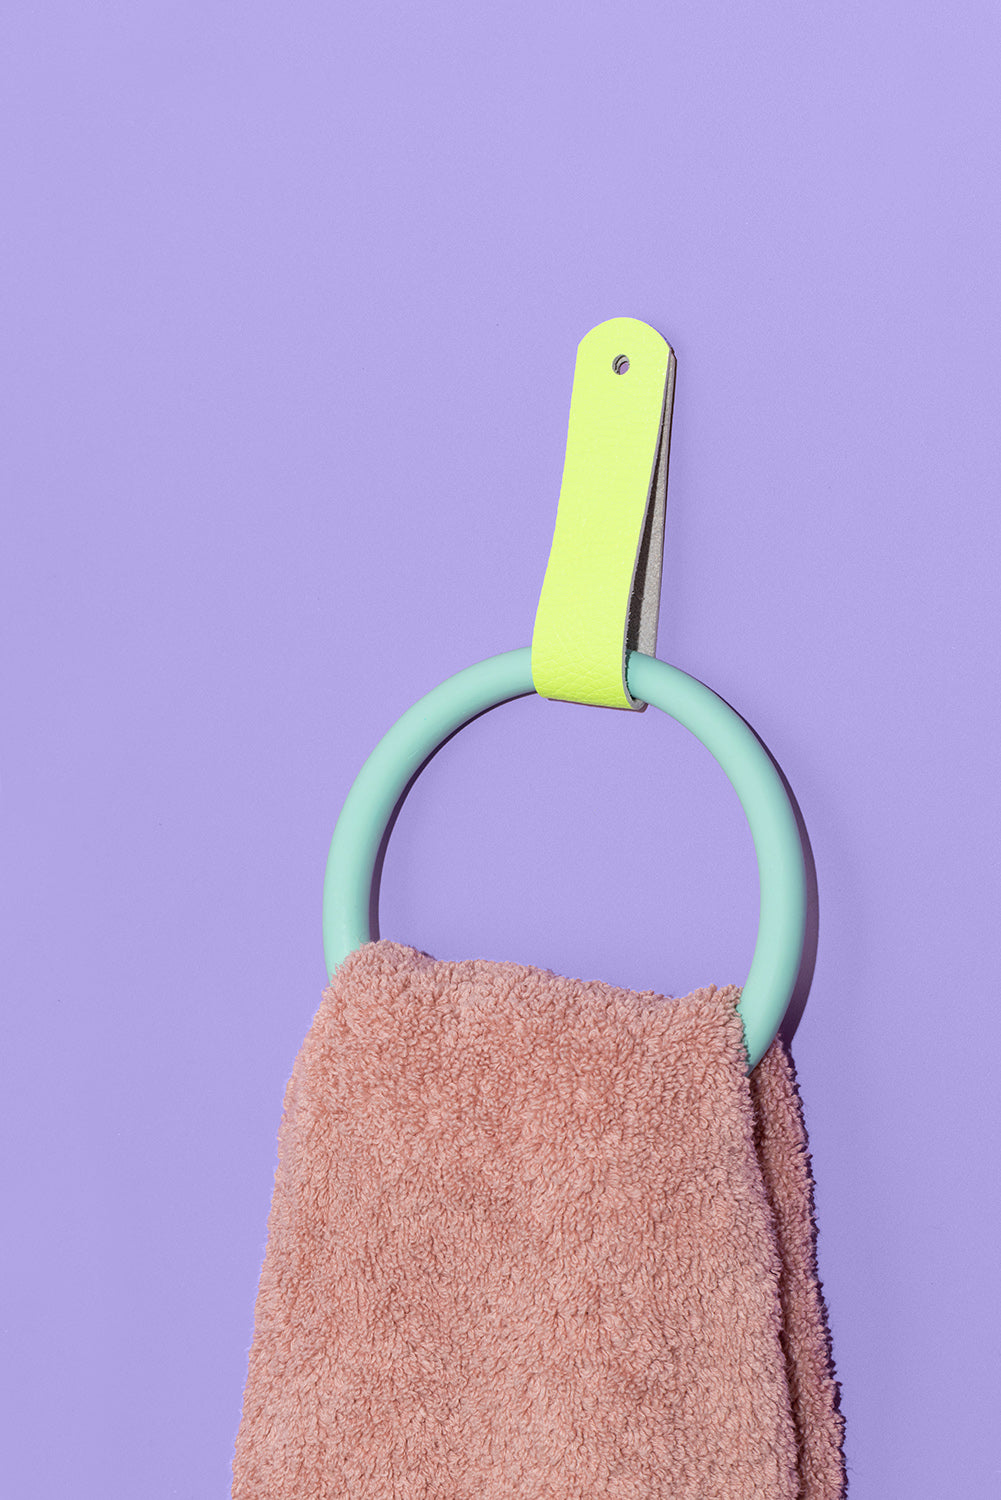 Towel Ring & Leather Strap - Mint Block Colour - Misshandled